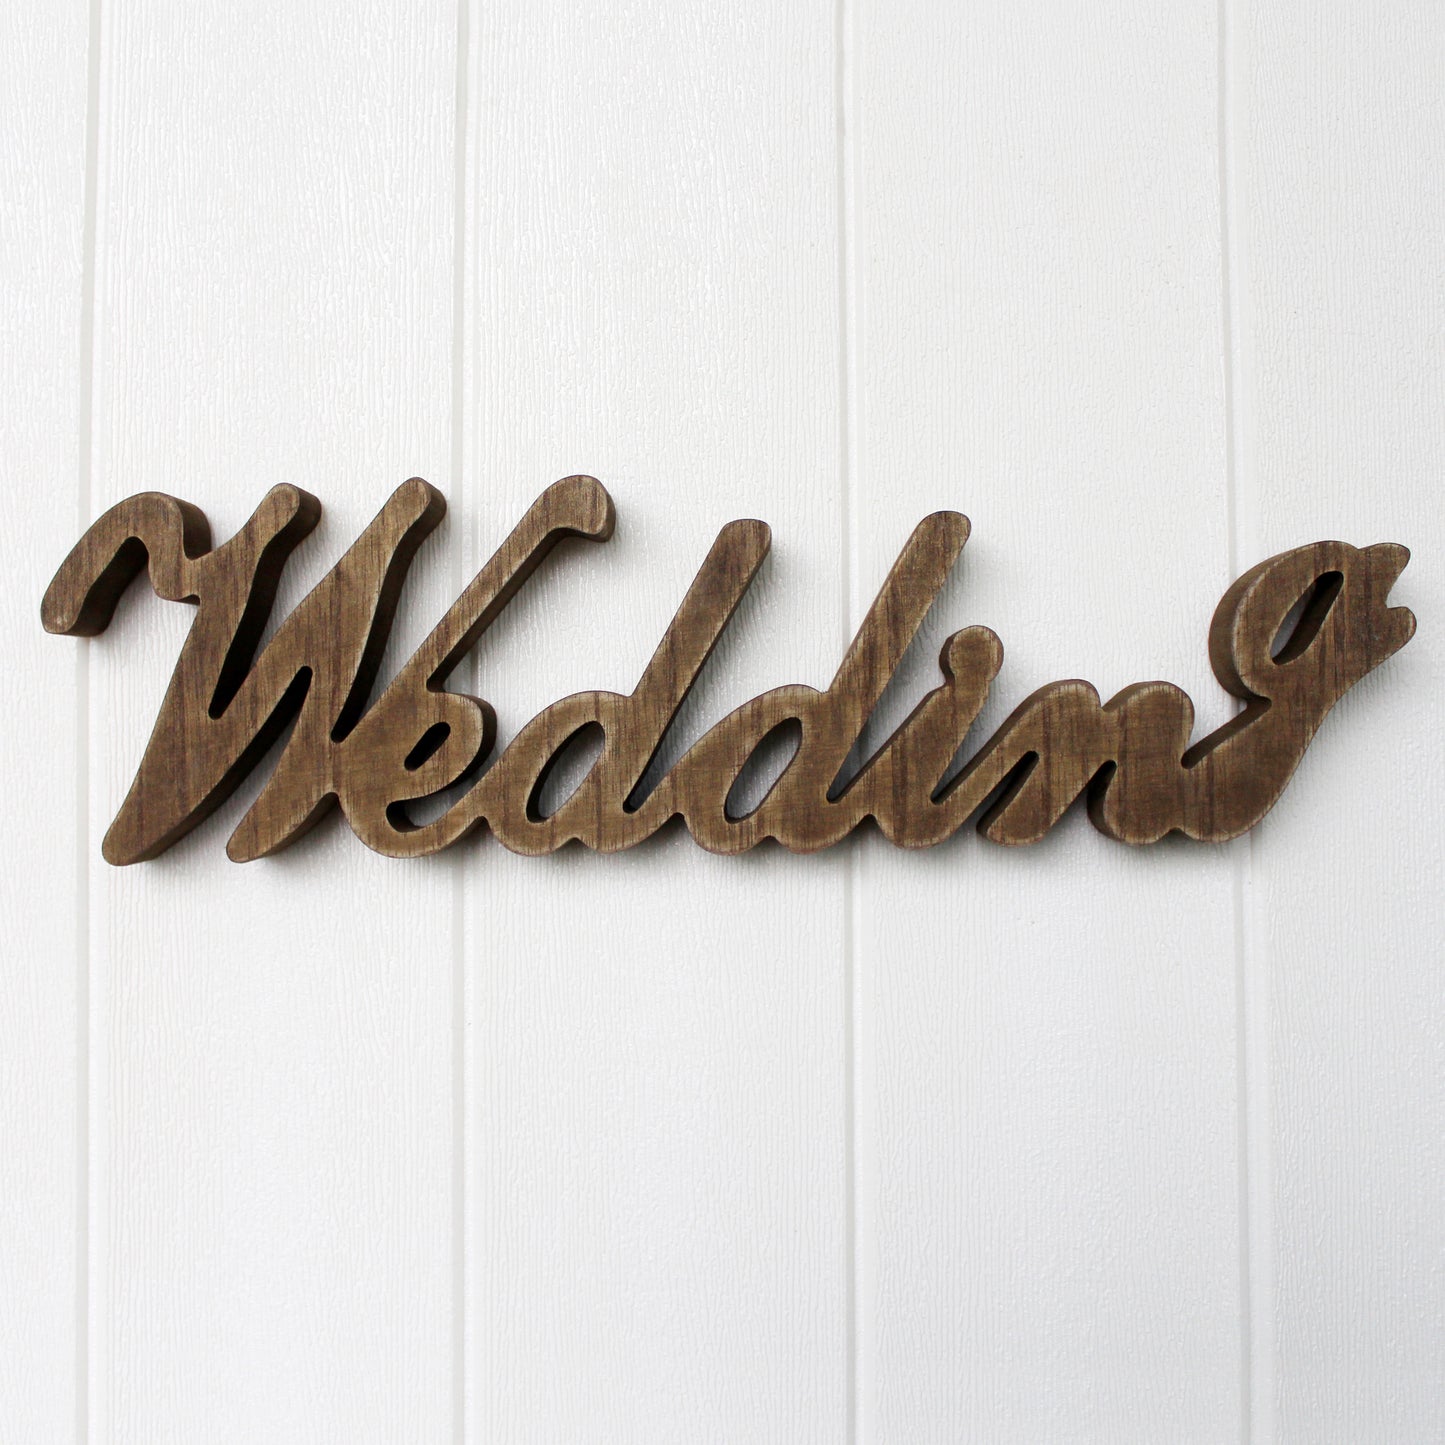 CVHOMEDECO. Rustic Vintage Distressed Wooden Words Sign Free Standing "Wedding" Tabletop/Shelf/Wall/Wedding/Party Decoration Art, 15.5 x 4.25 x 1 Inch